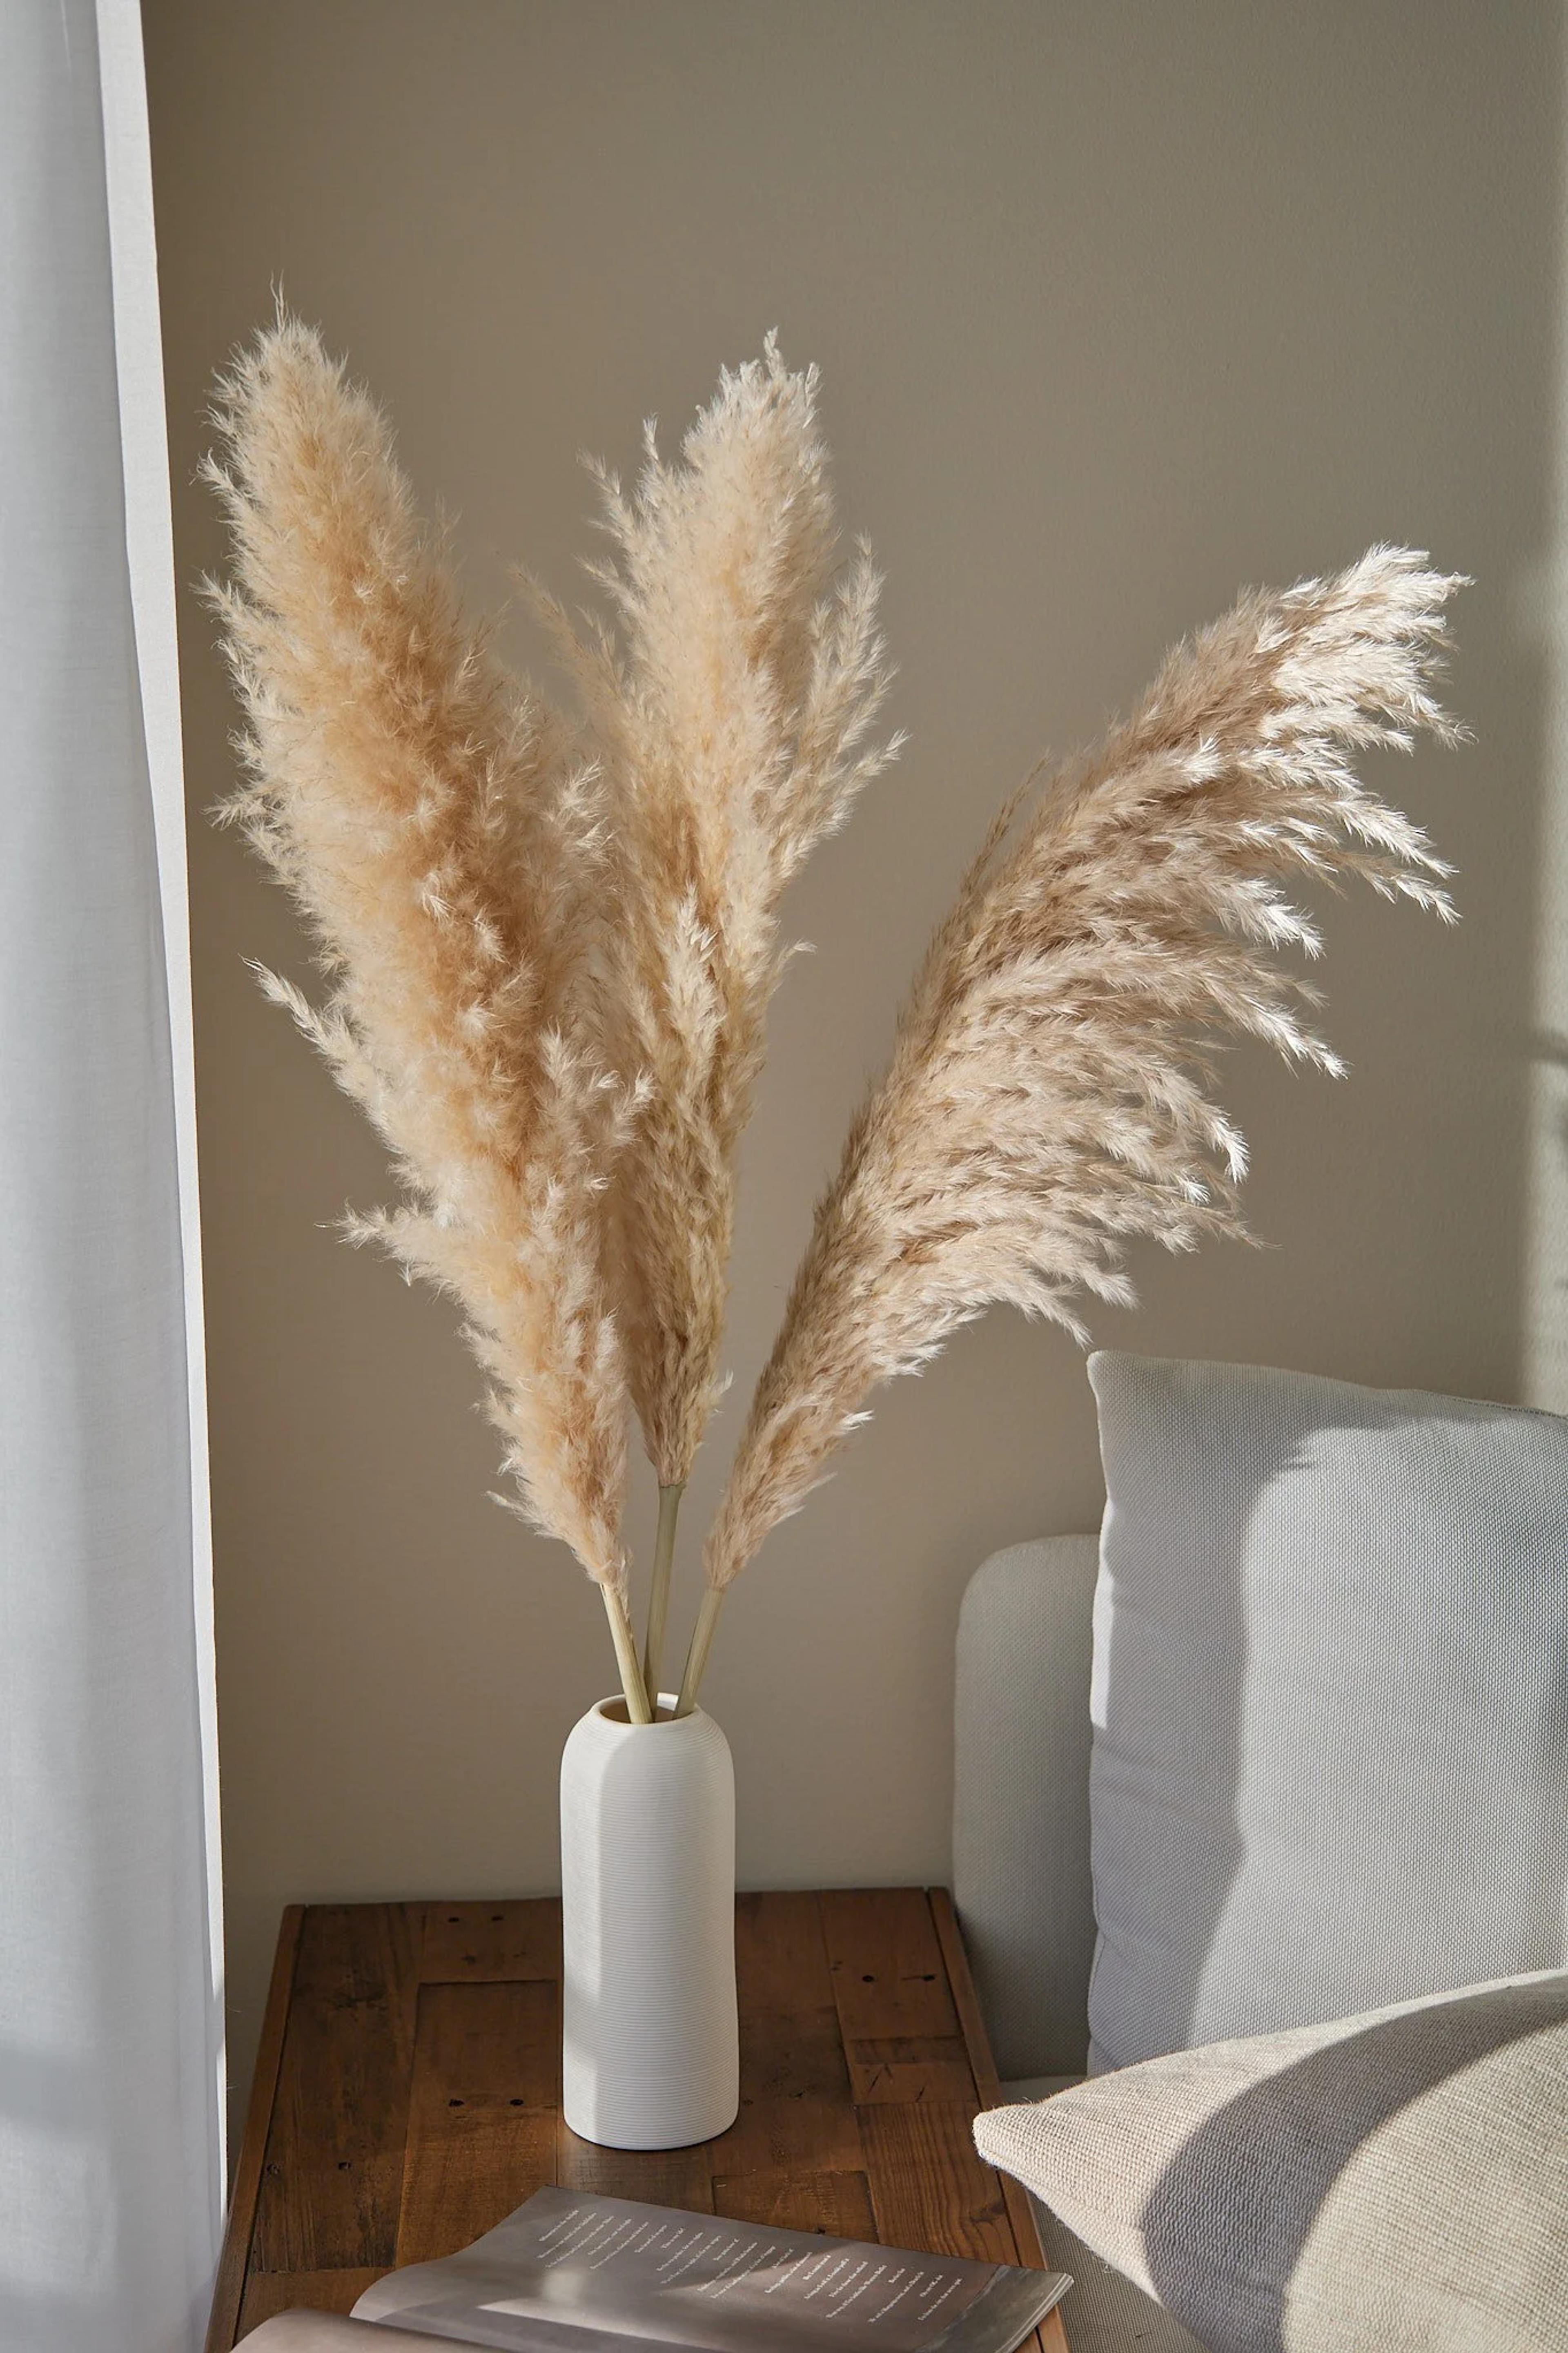 Medium PAMPAS GRASS (3 stems) Fluffy Natural Dried Large 37" tall - For Love Of Pampas